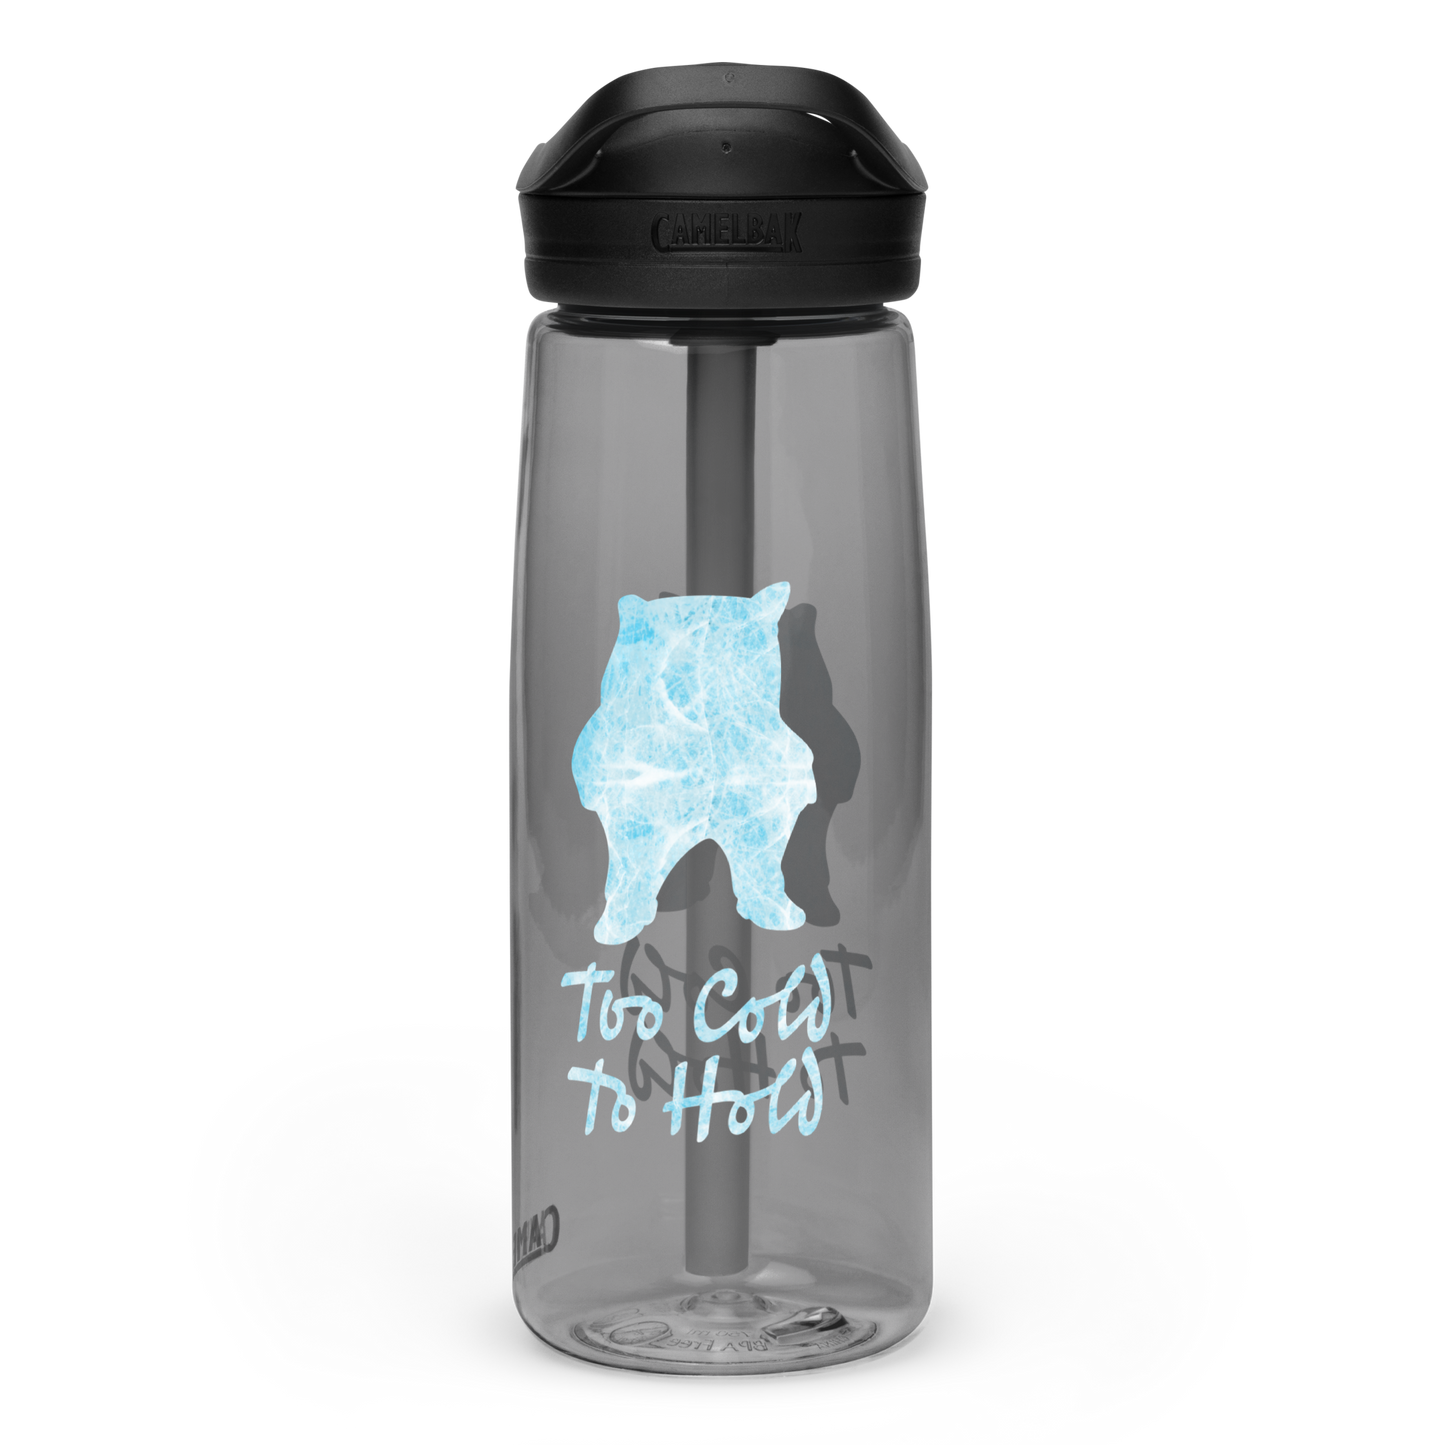 NAFO Too Cold Water Bottle